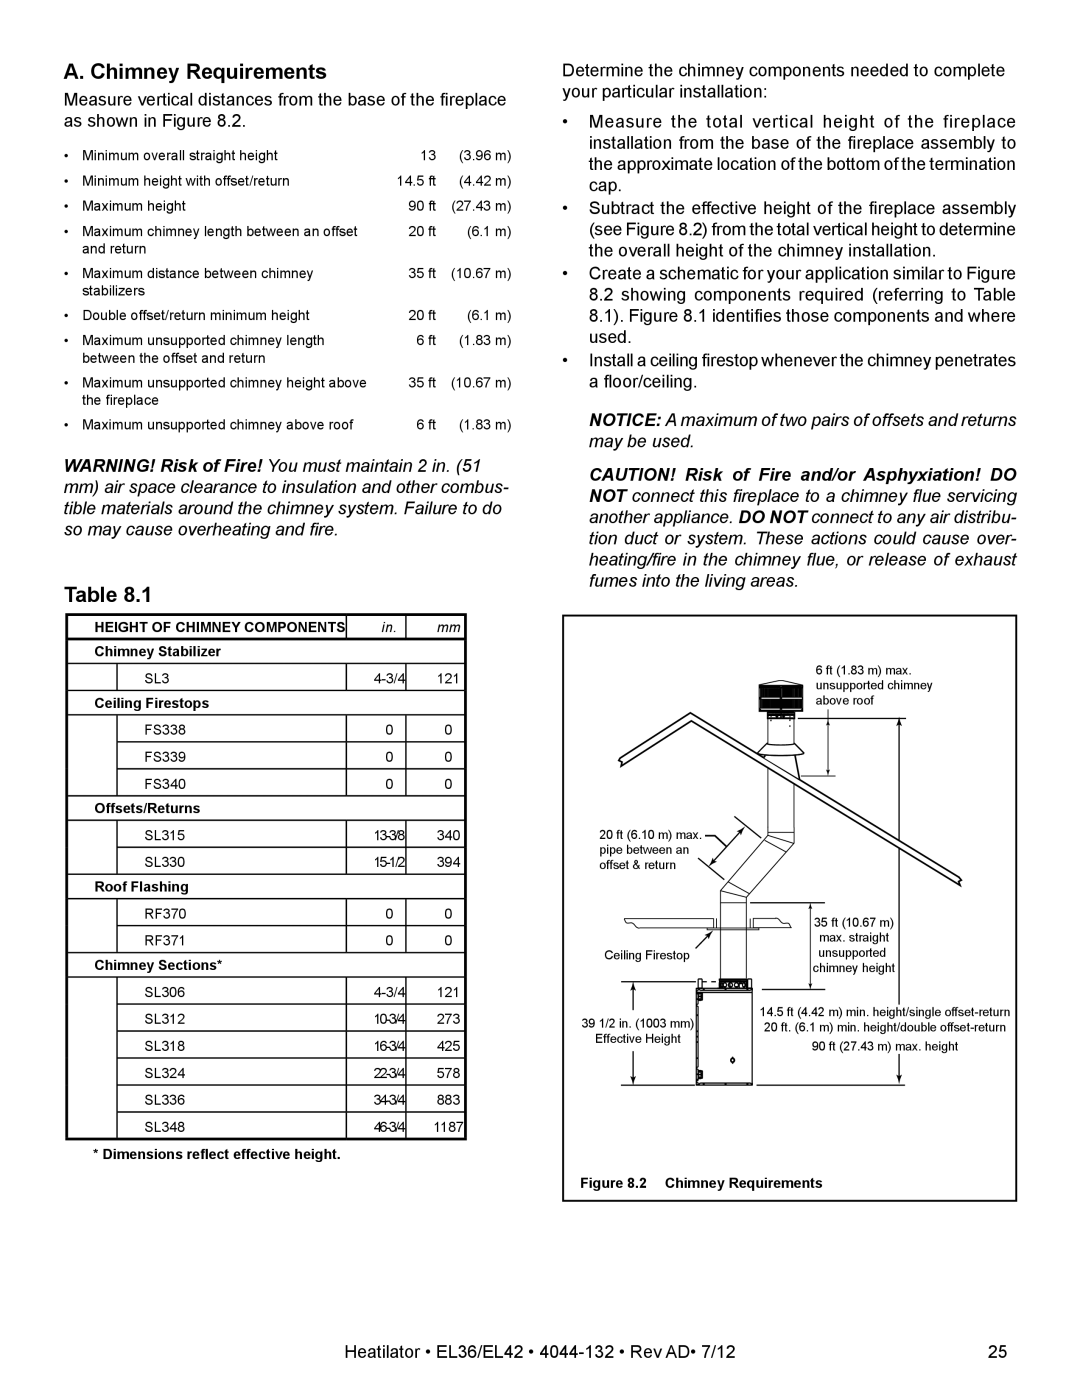 Hearth and Home Technologies EL42, EL36 owner manual Chimney Requirements 